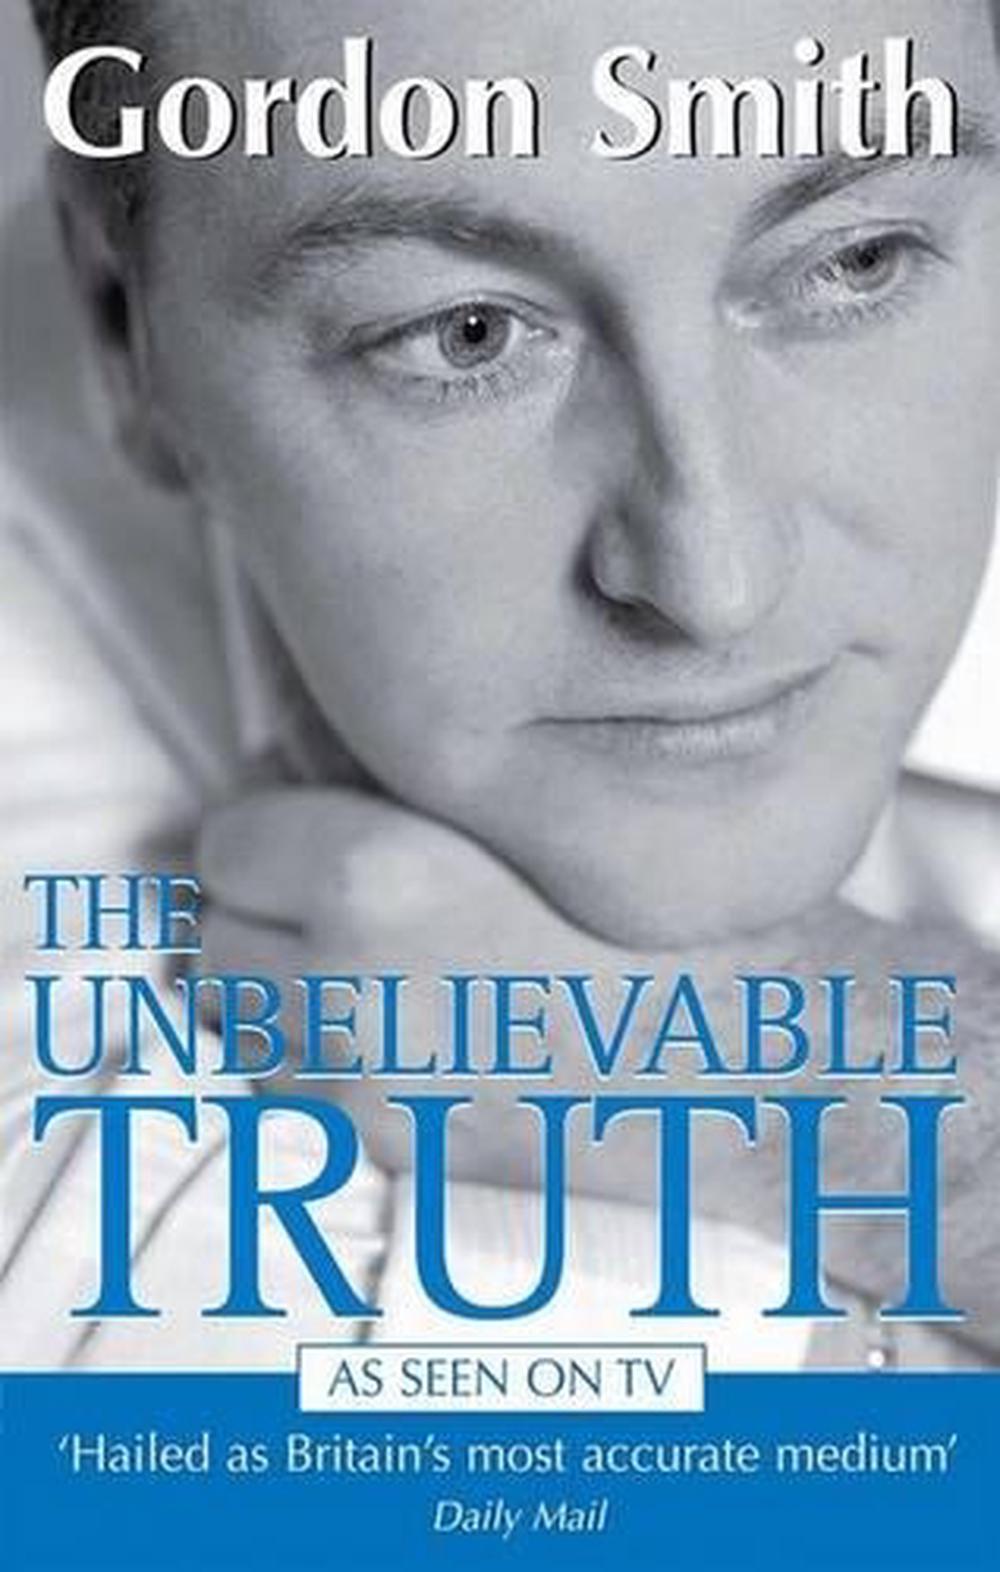 The Unbelievable Truth by Gordon Smith (English) Paperback Book Free ...